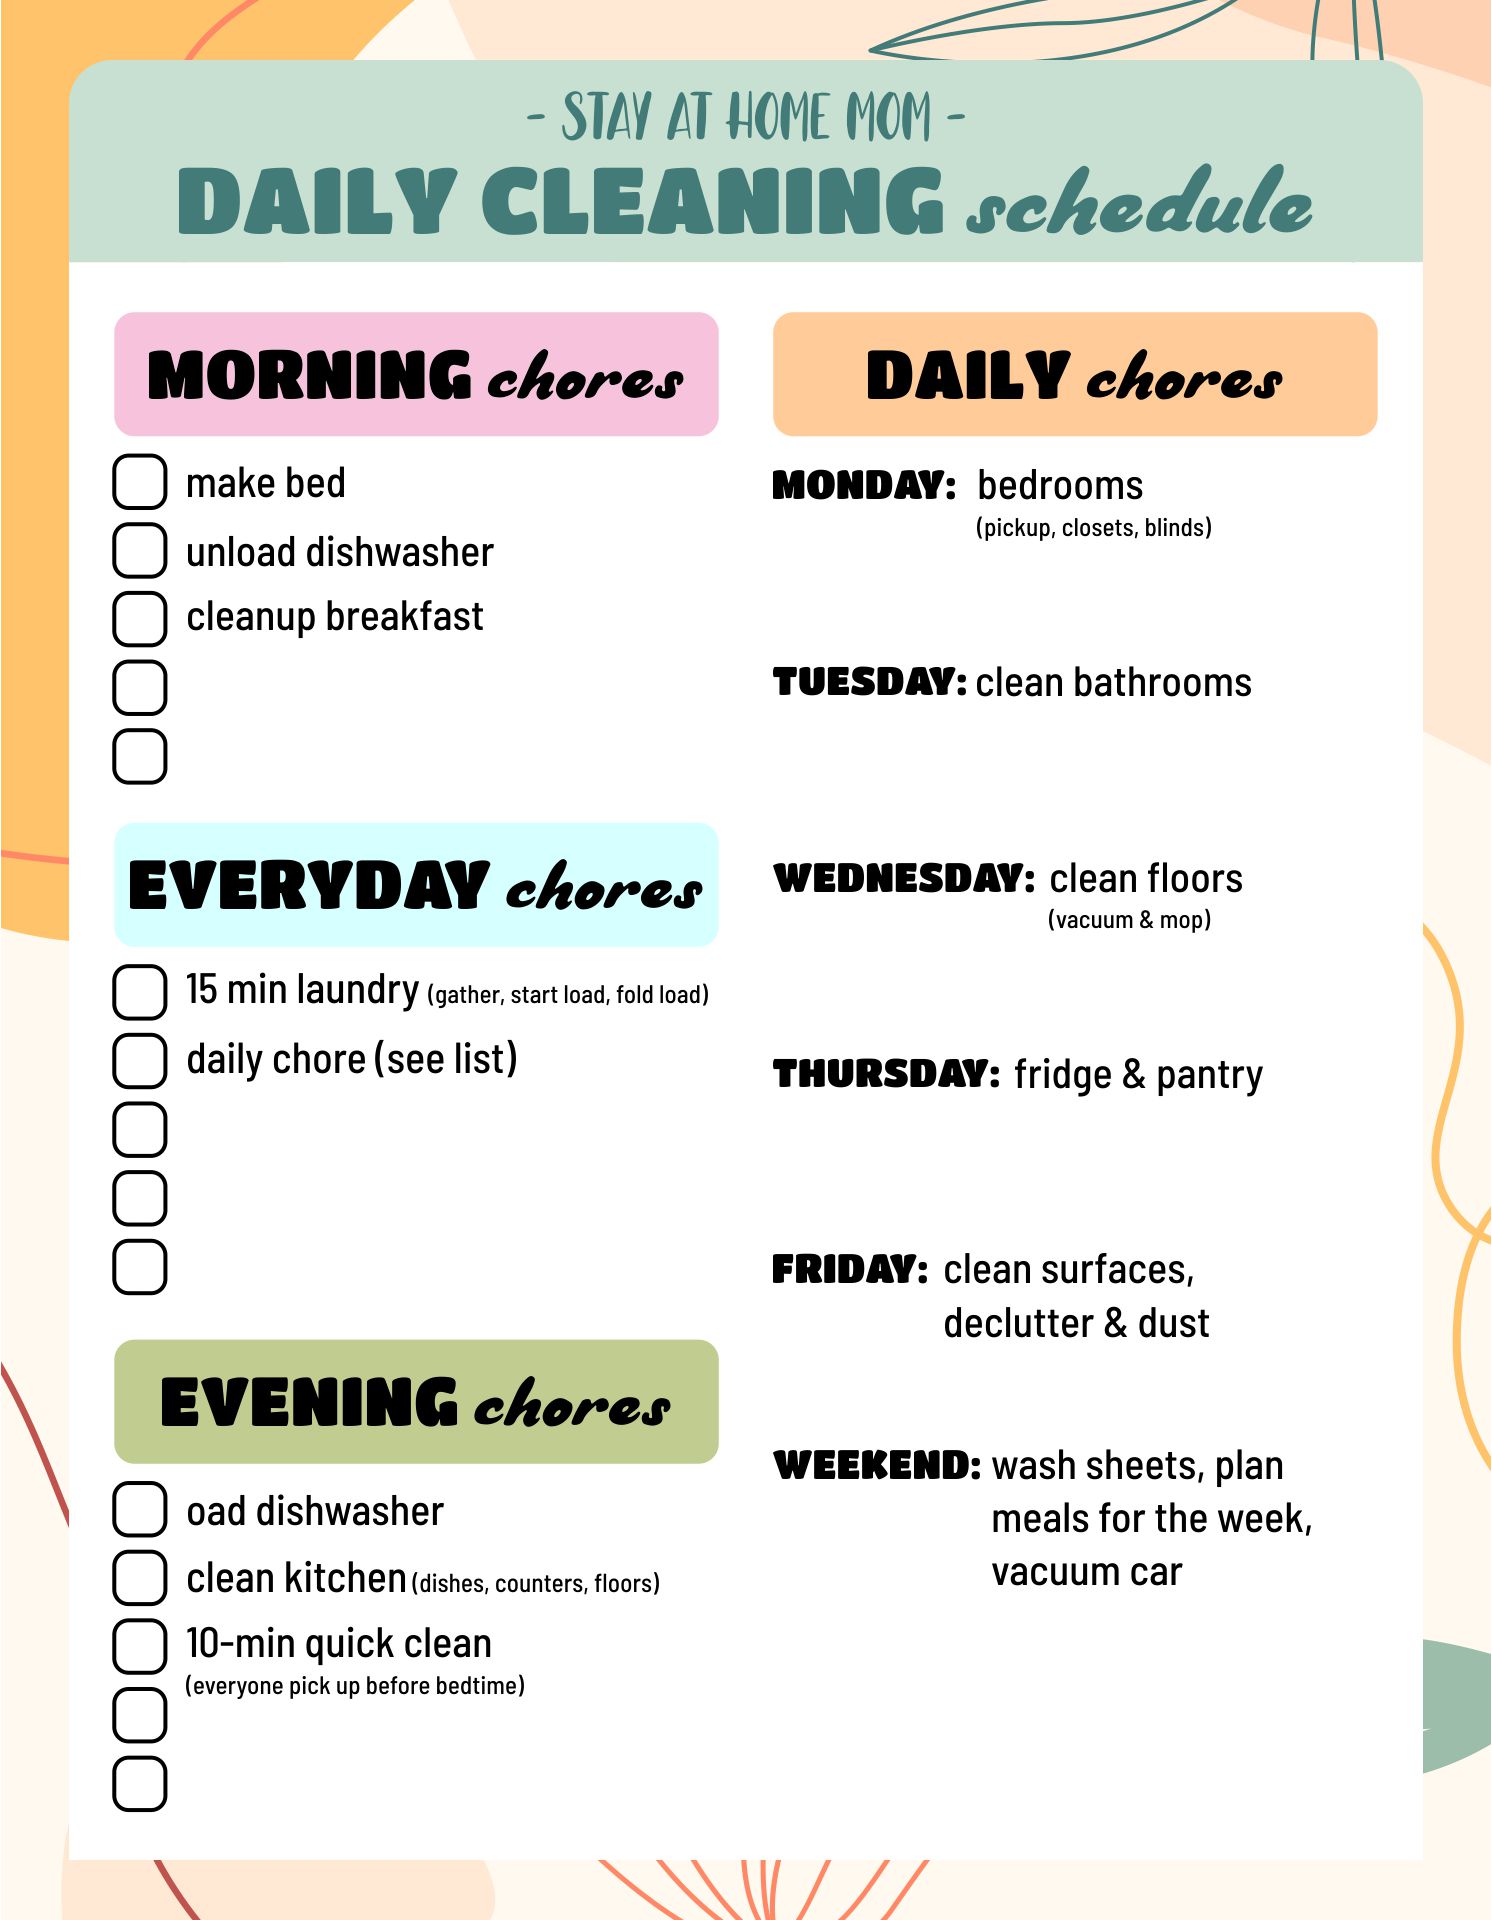 Daily Cleaning Schedule for Stay at Home Moms